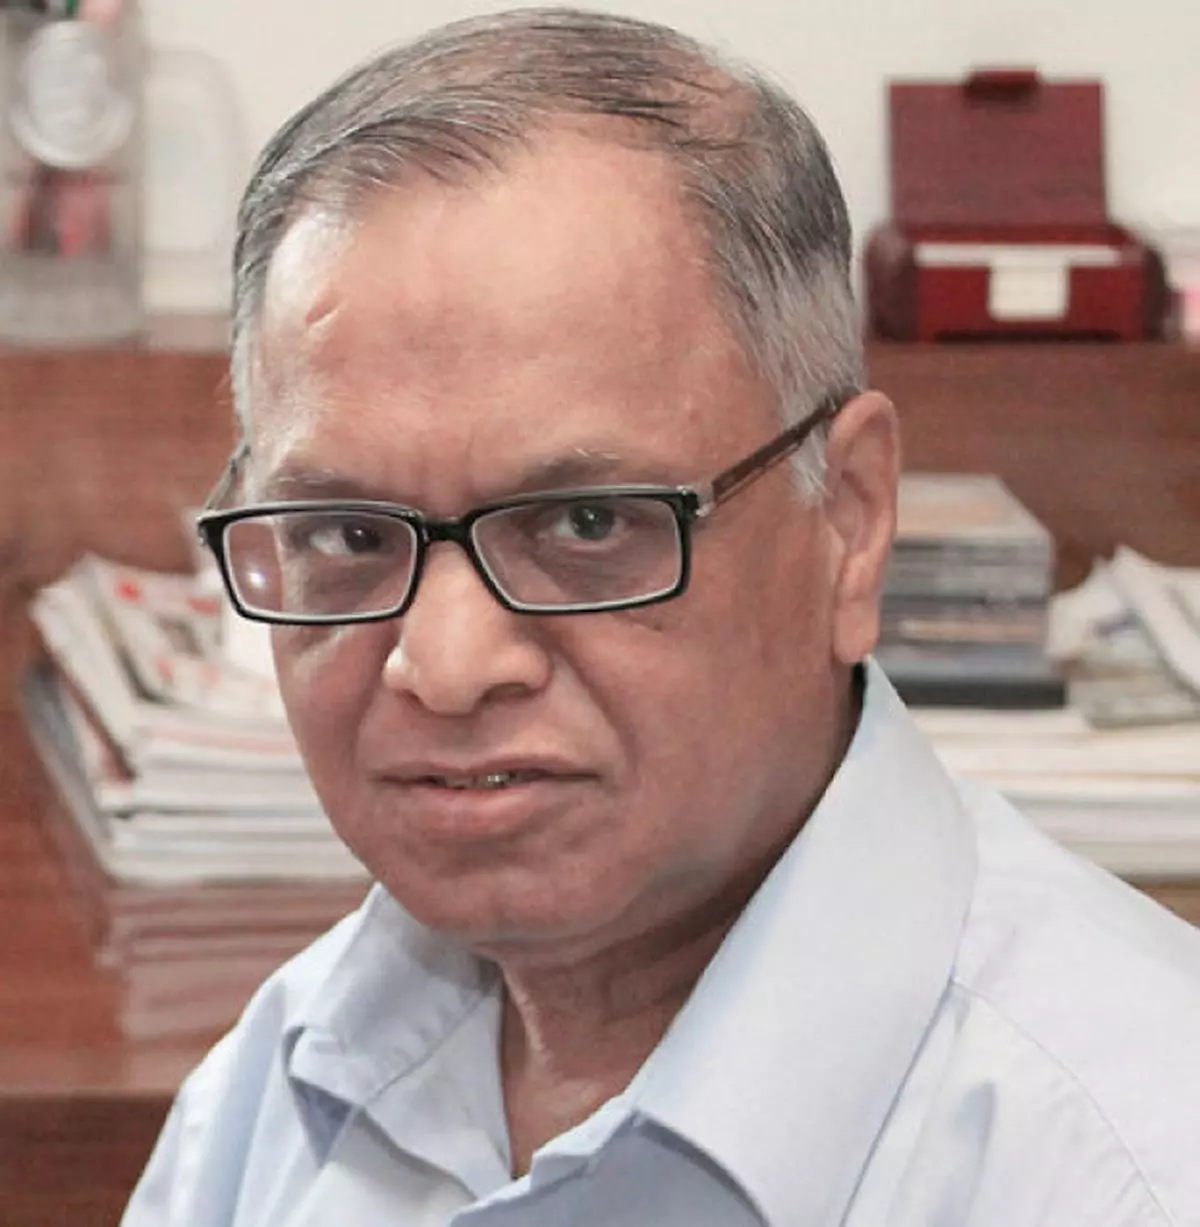 A file photo of Infosys founder N.R. Narayana Murthy